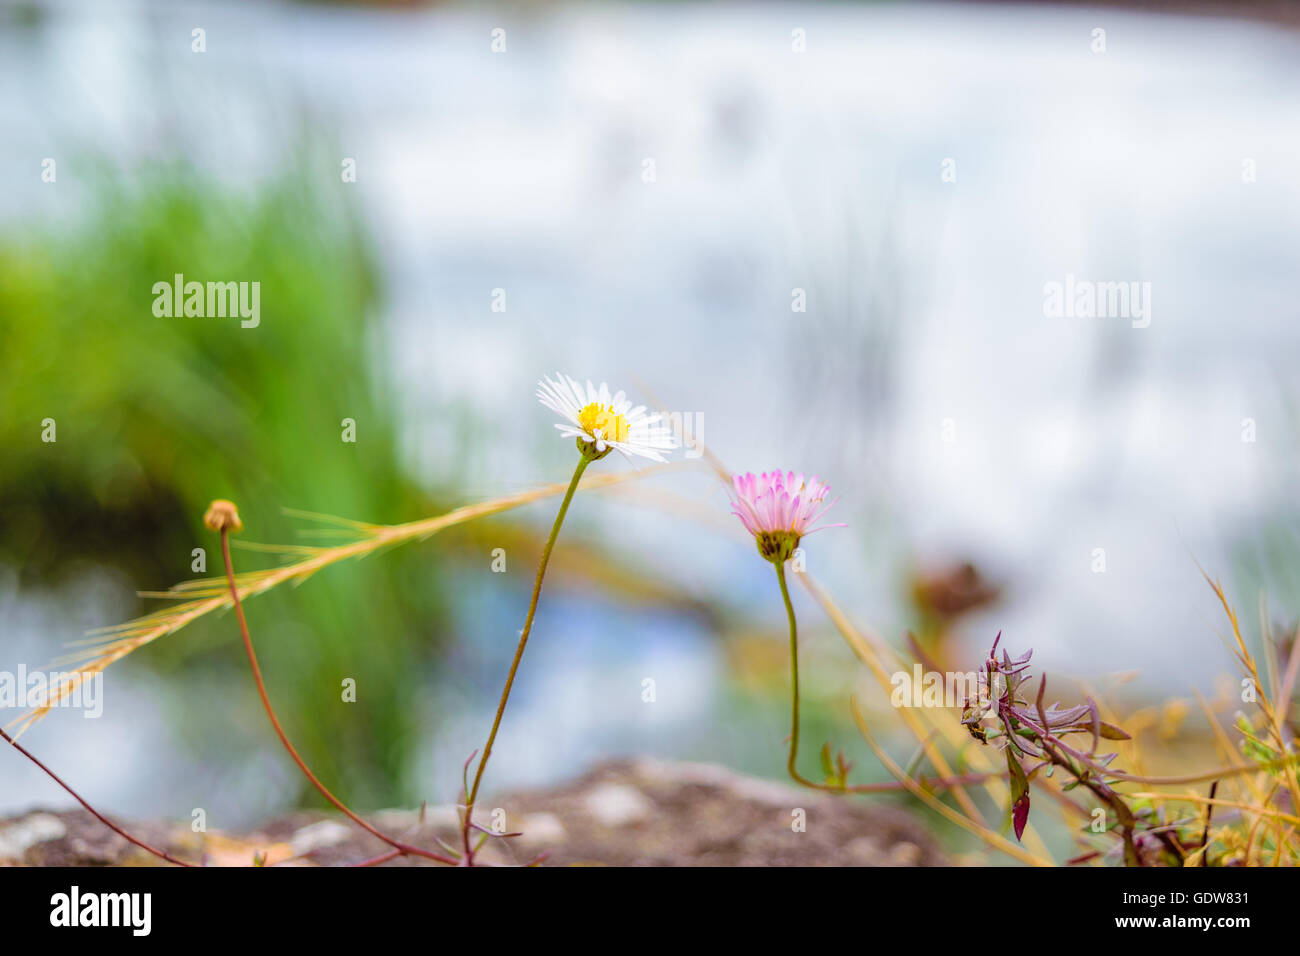 Two fragile flowers in focus Stock Photo